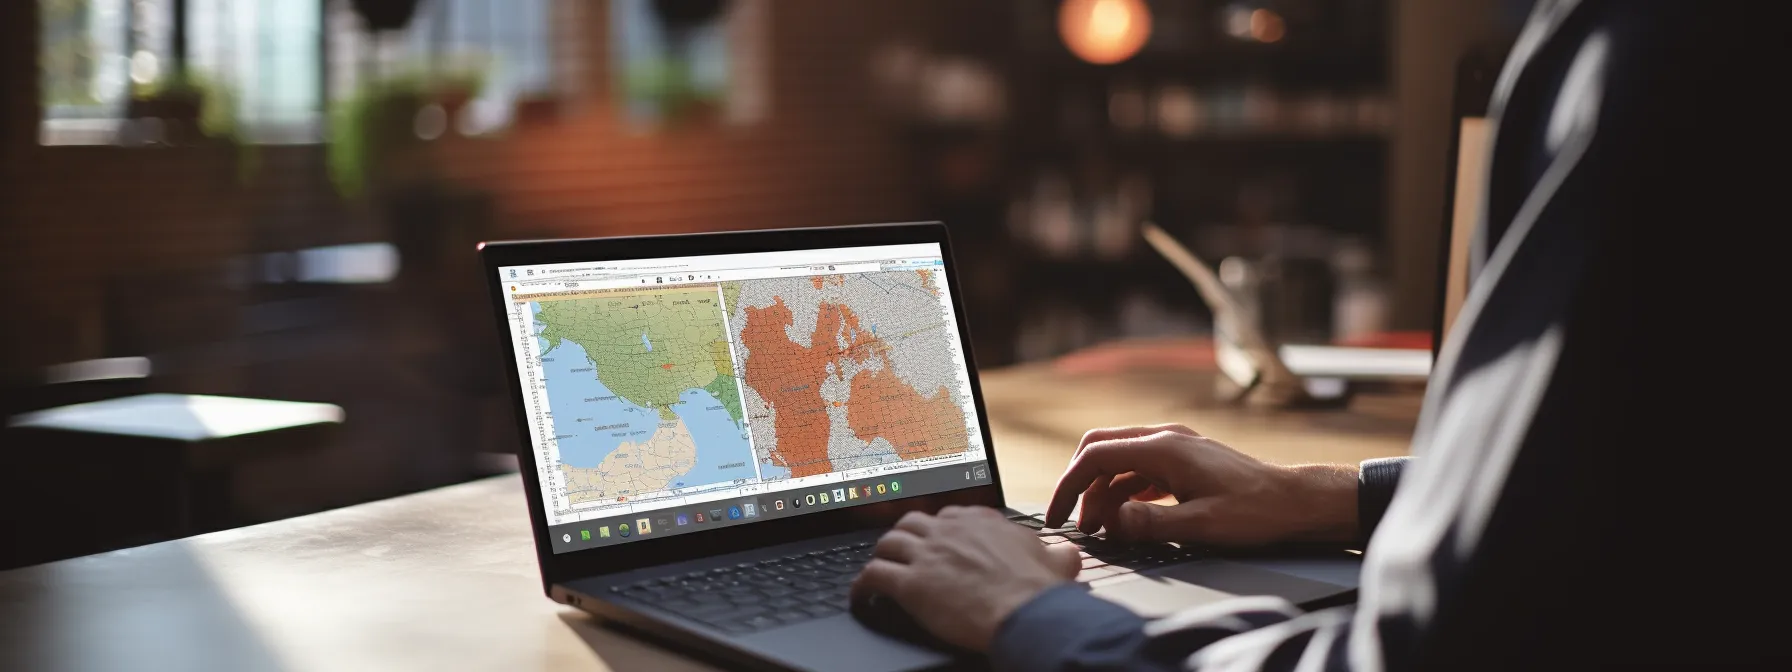 a person typing on a laptop while surrounded by maps and diagrams of local areas.